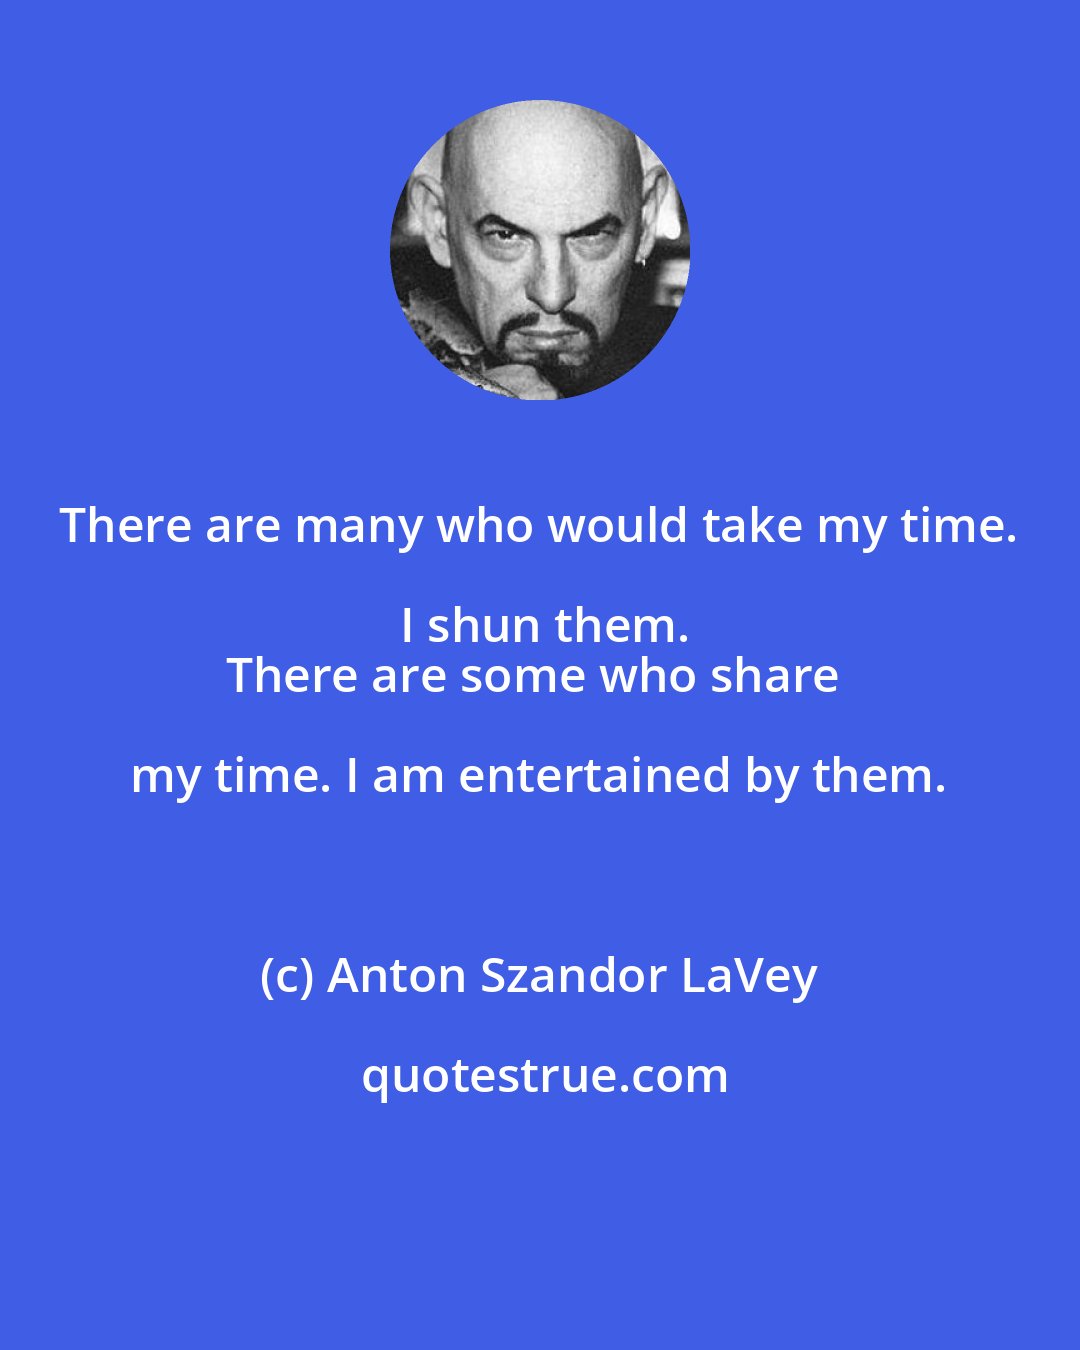 Anton Szandor LaVey: There are many who would take my time. I shun them.
There are some who share my time. I am entertained by them.